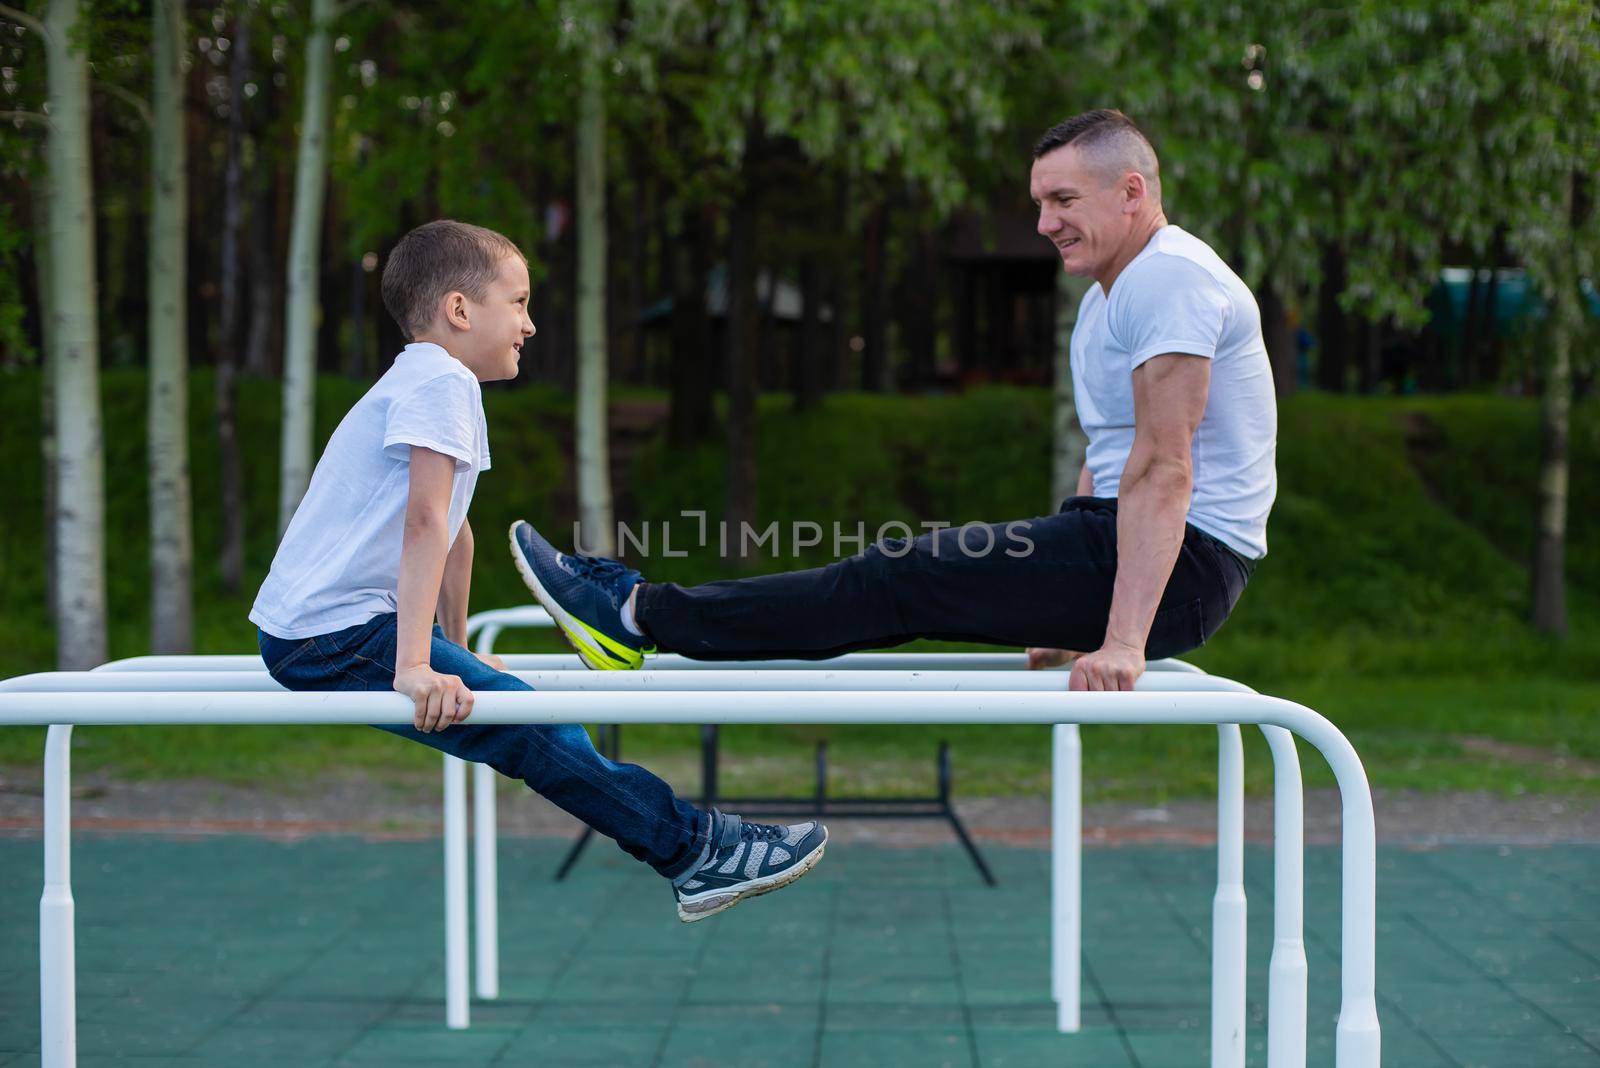 Caucasian man trains a boy on the uneven bars on the playground. Dad and son go in for outdoor sports